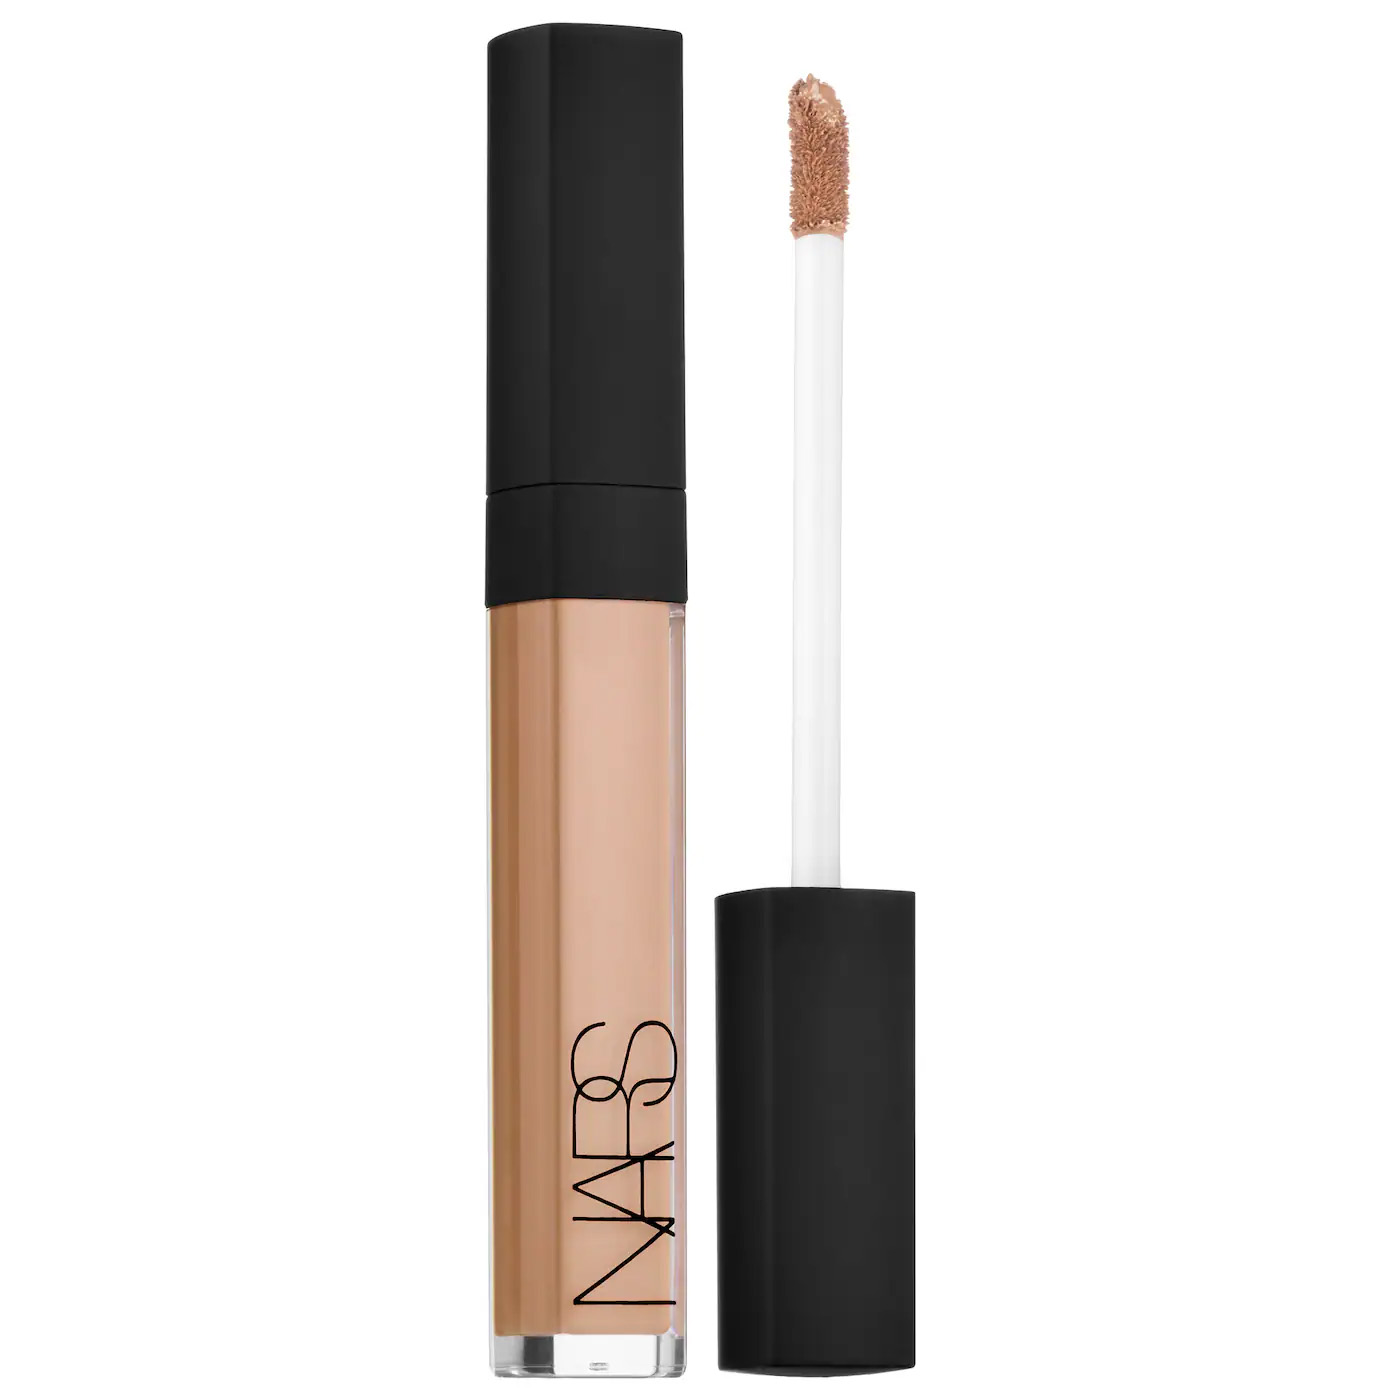 NARS Radiant Creamy Concealer in the shade Madeleine